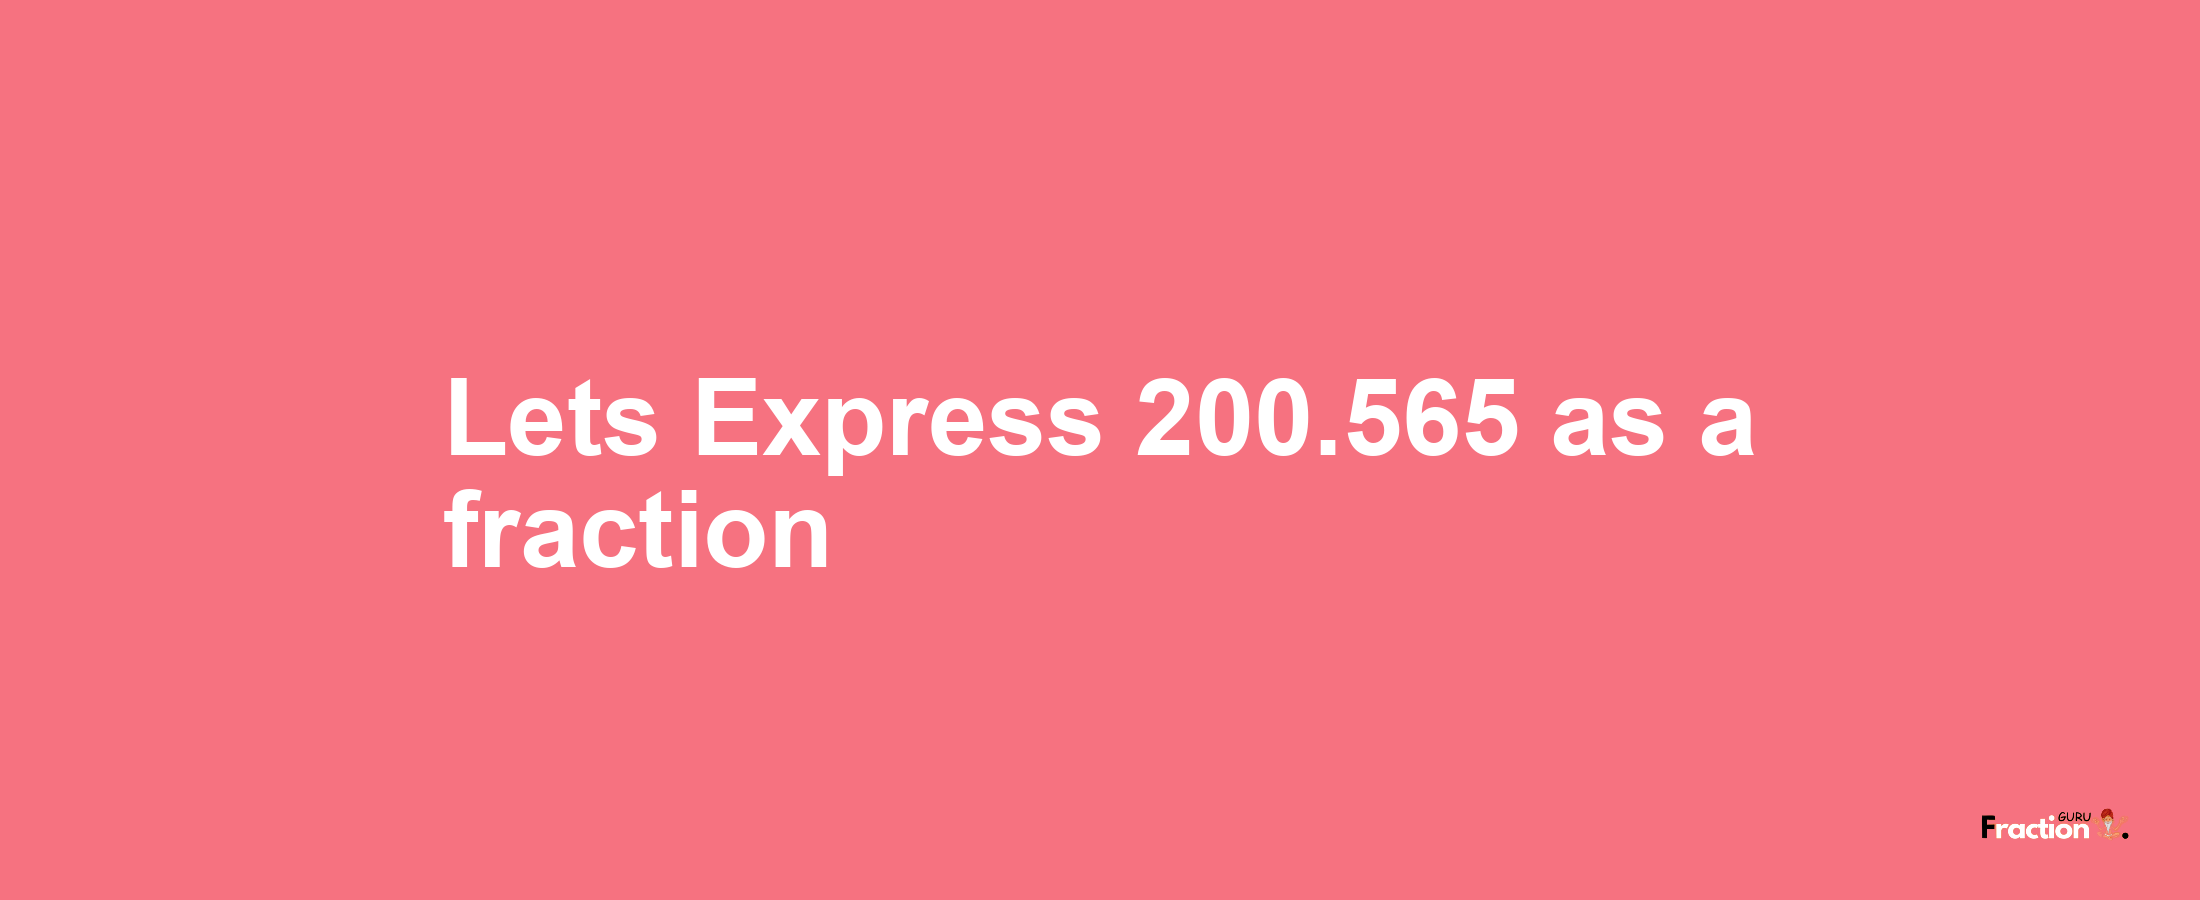 Lets Express 200.565 as afraction